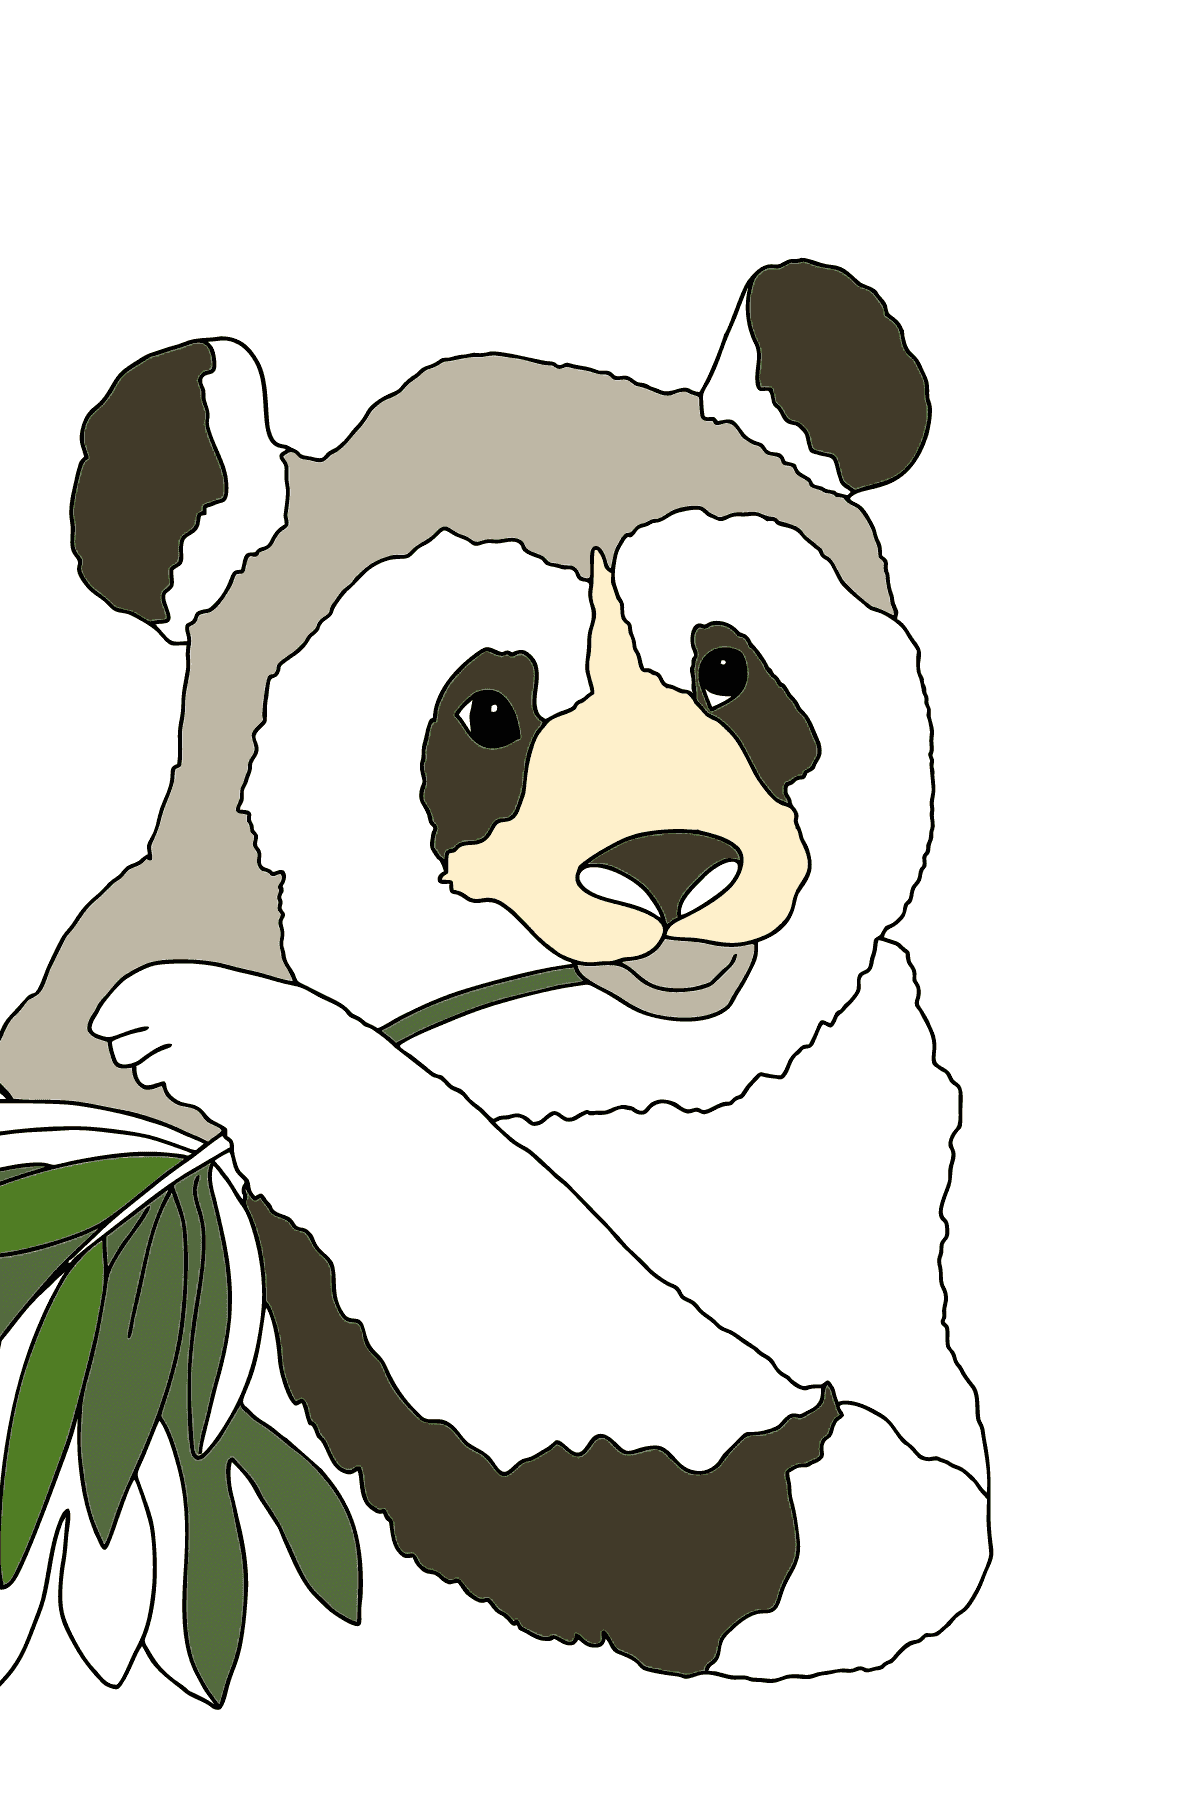 Coloring Page - A Panda is Eating Bamboo Stems and Leaves - Coloring Pages for Children